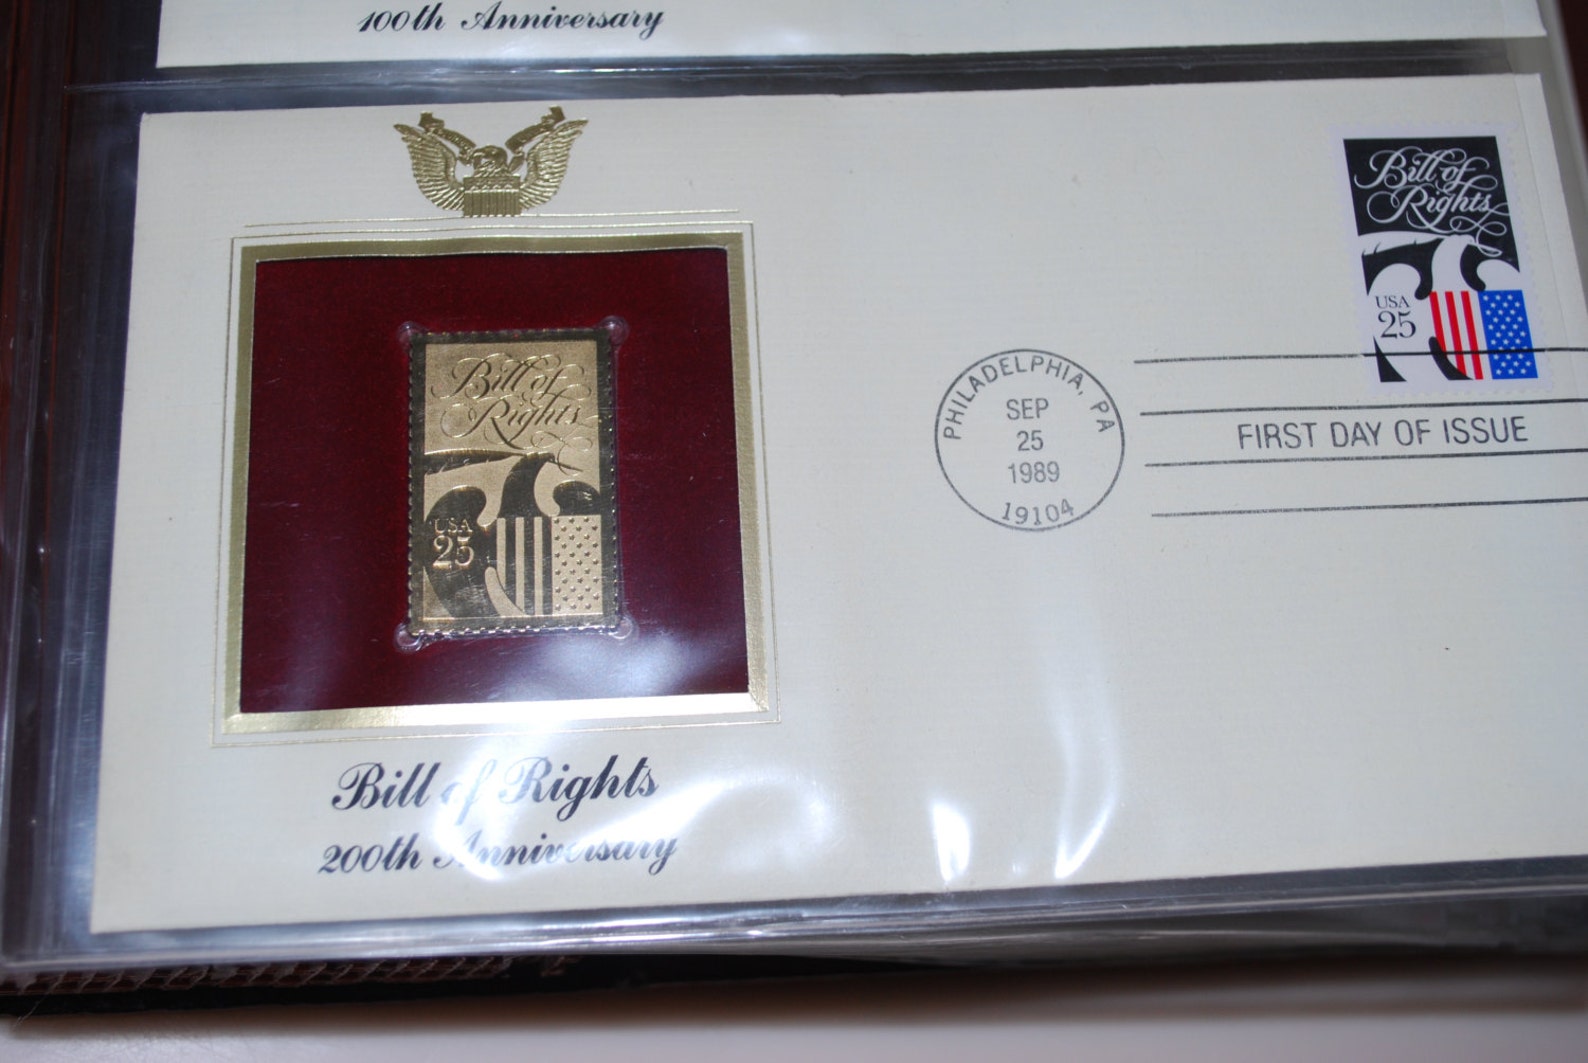 Bill of Rights 200th Anniversary 22 KT Gold Replica 25 Cent | Etsy